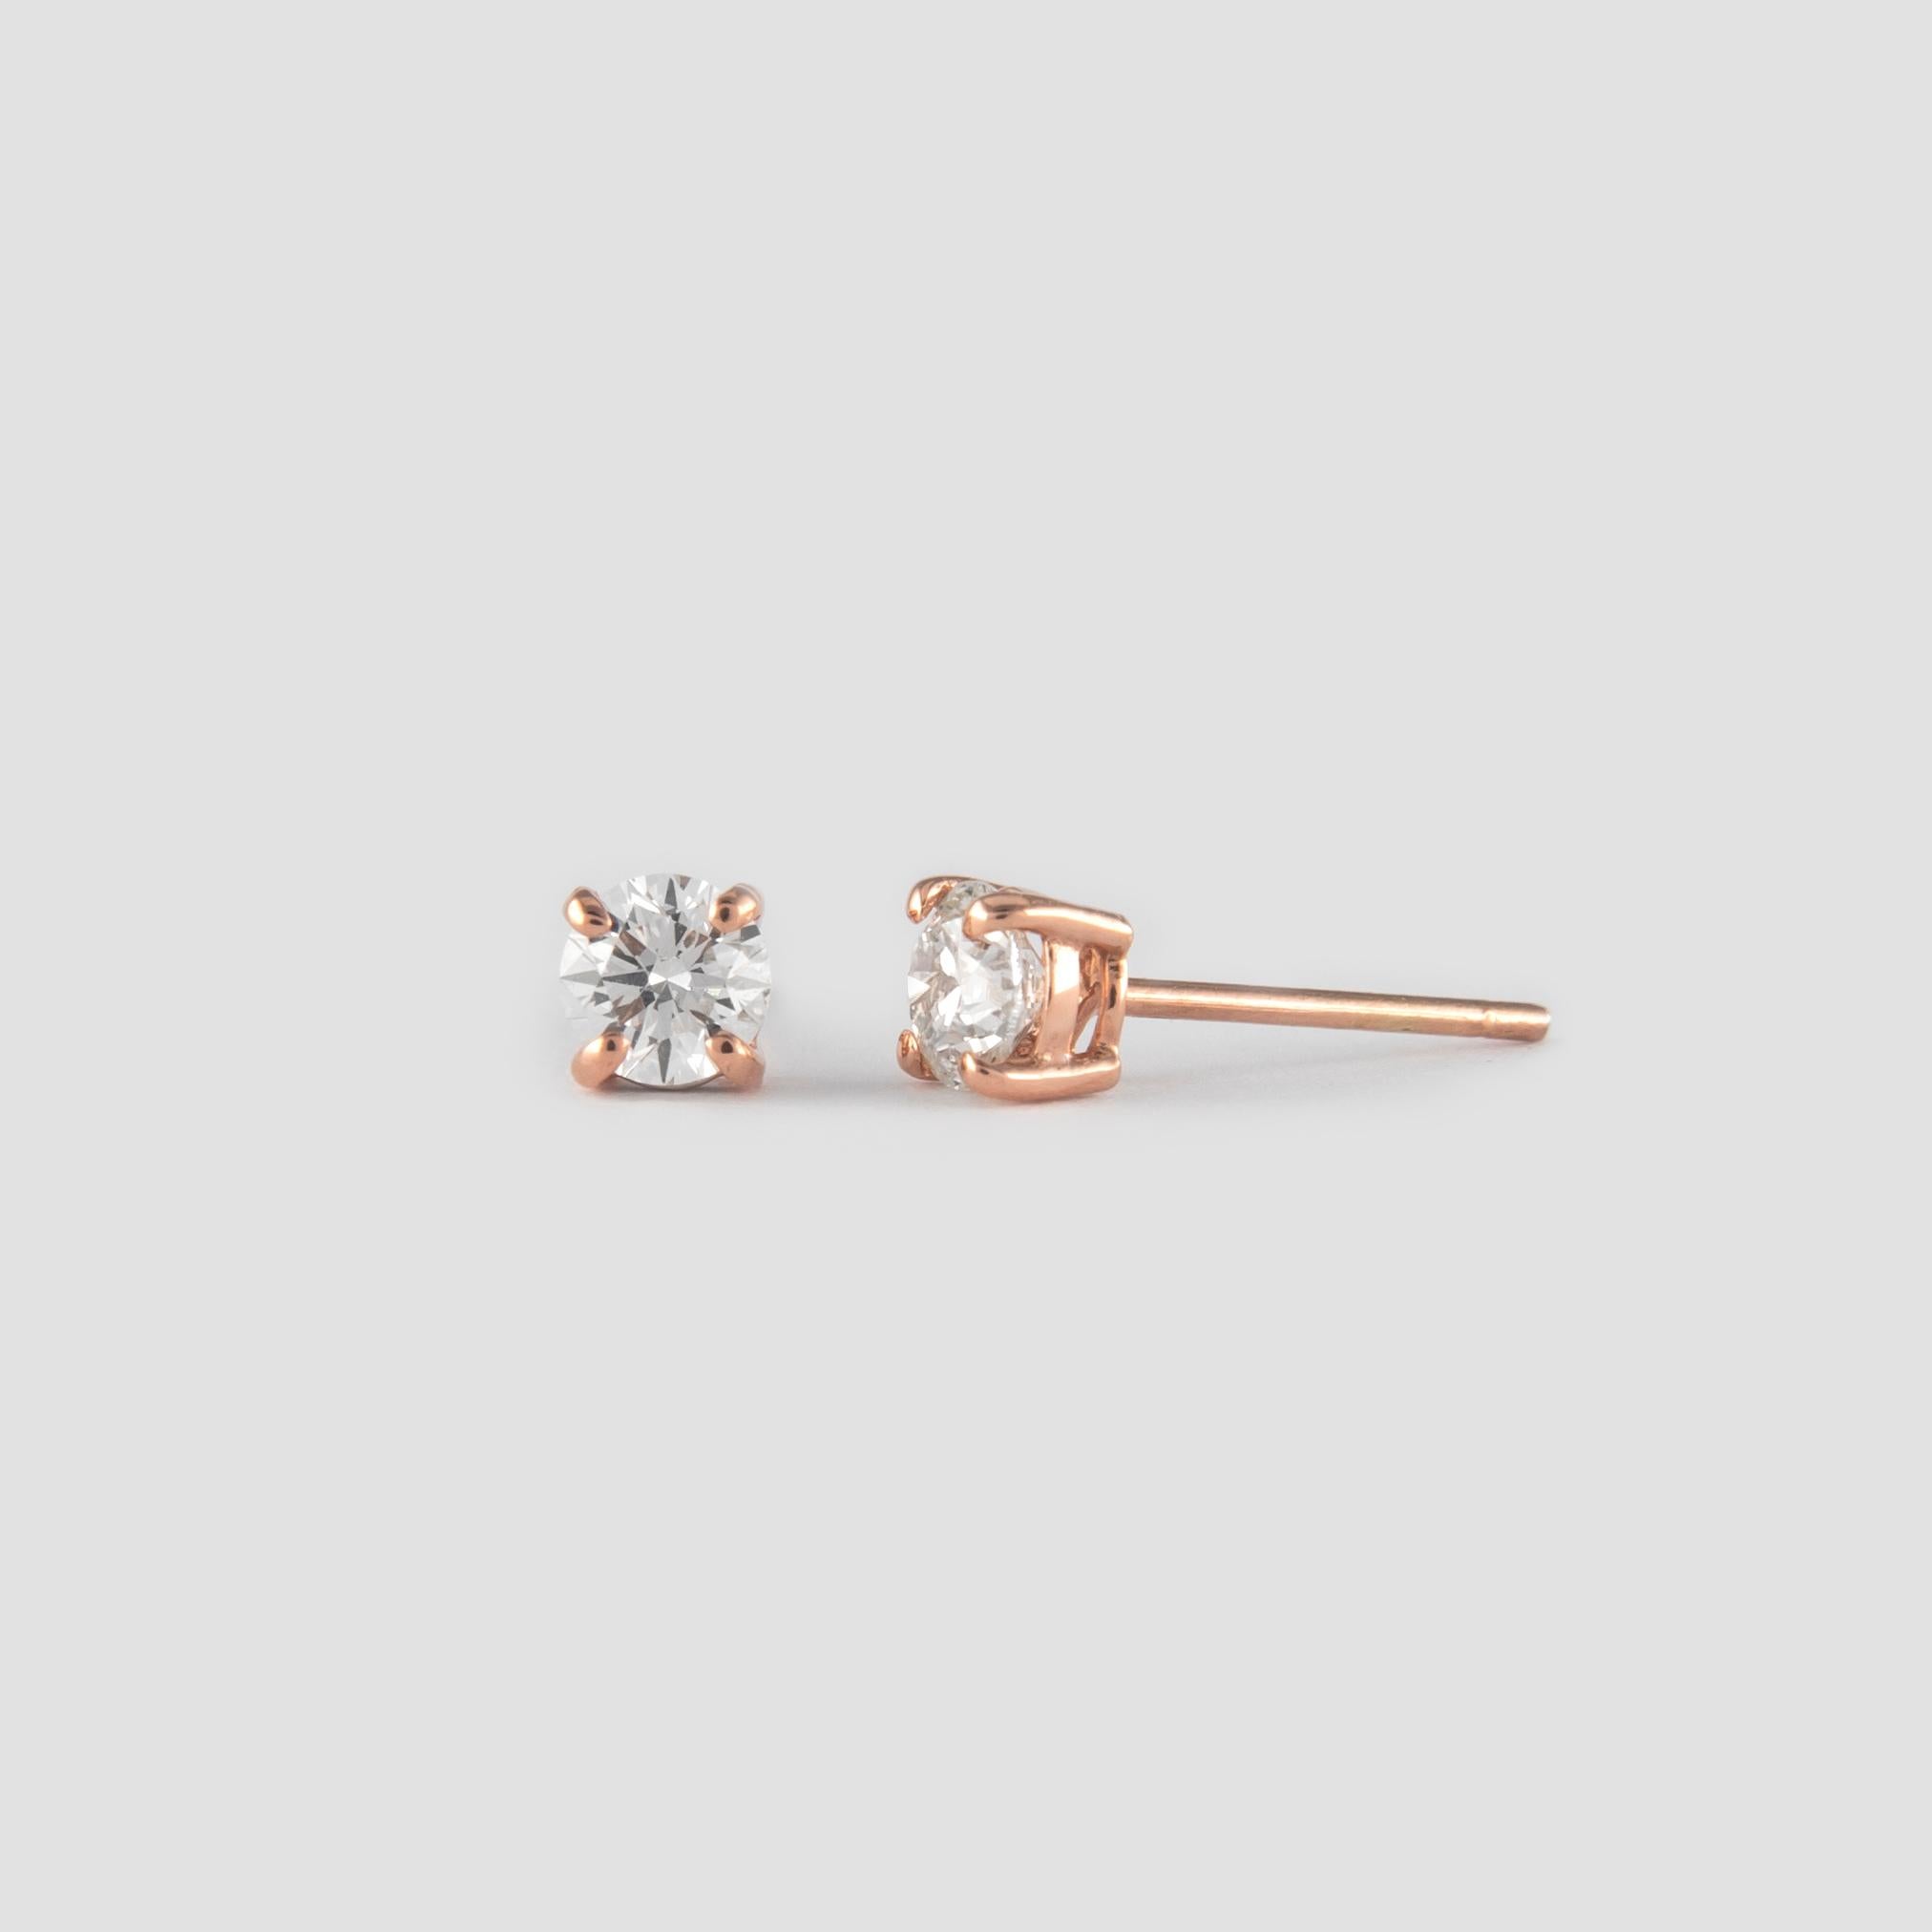 Classic diamond stud earrings. By Alexander of Beverly Hills.
Two round brilliant diamonds 0.92 carats total. Approximately G/H color and VS clarity. Four prong set, 14k rose gold. 
Accommodated with an up to date appraisal by a GIA G.G., please